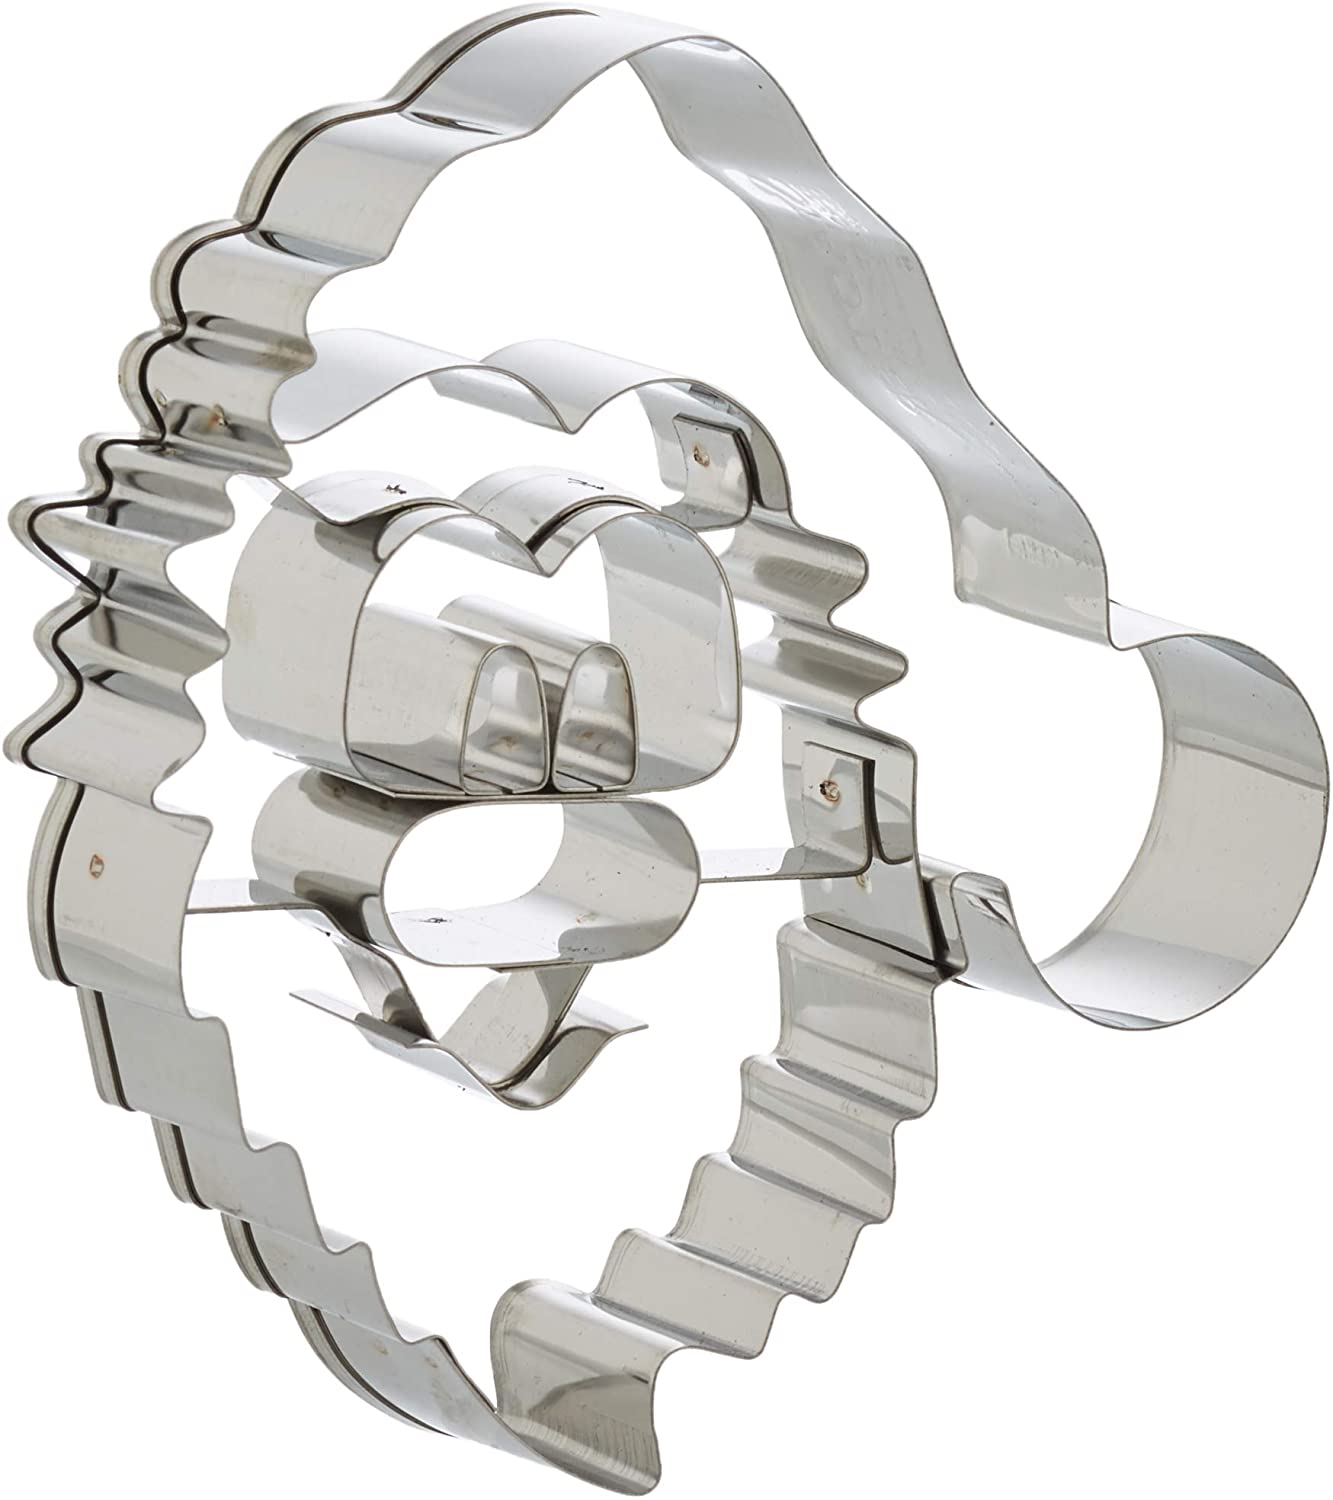 Staedter Embossed Santa Face Cookie Cutter, 9 cm, Stainless Steel